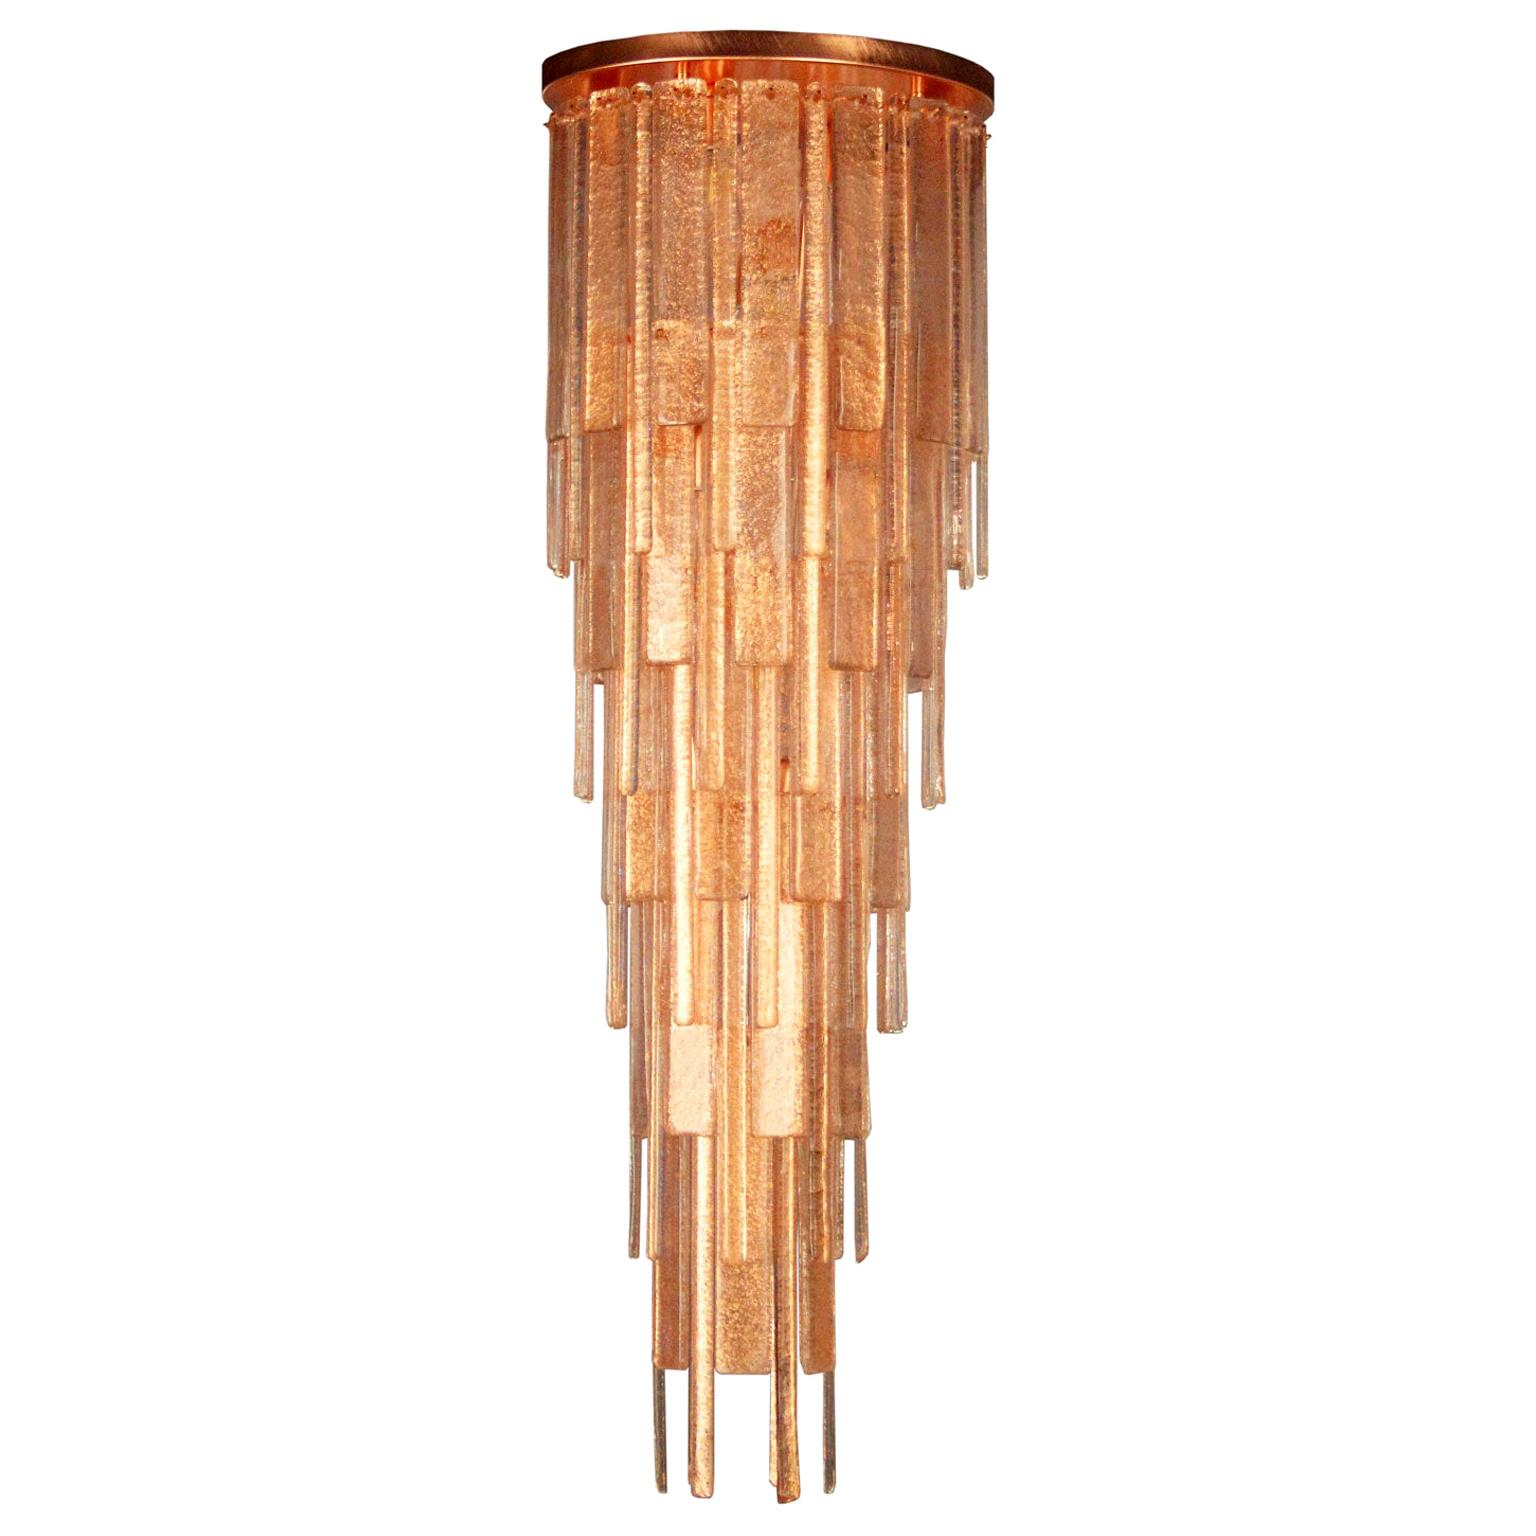 Ceiling lamp Copper Murano Glass Listels brushed copper fixture by Multiforme